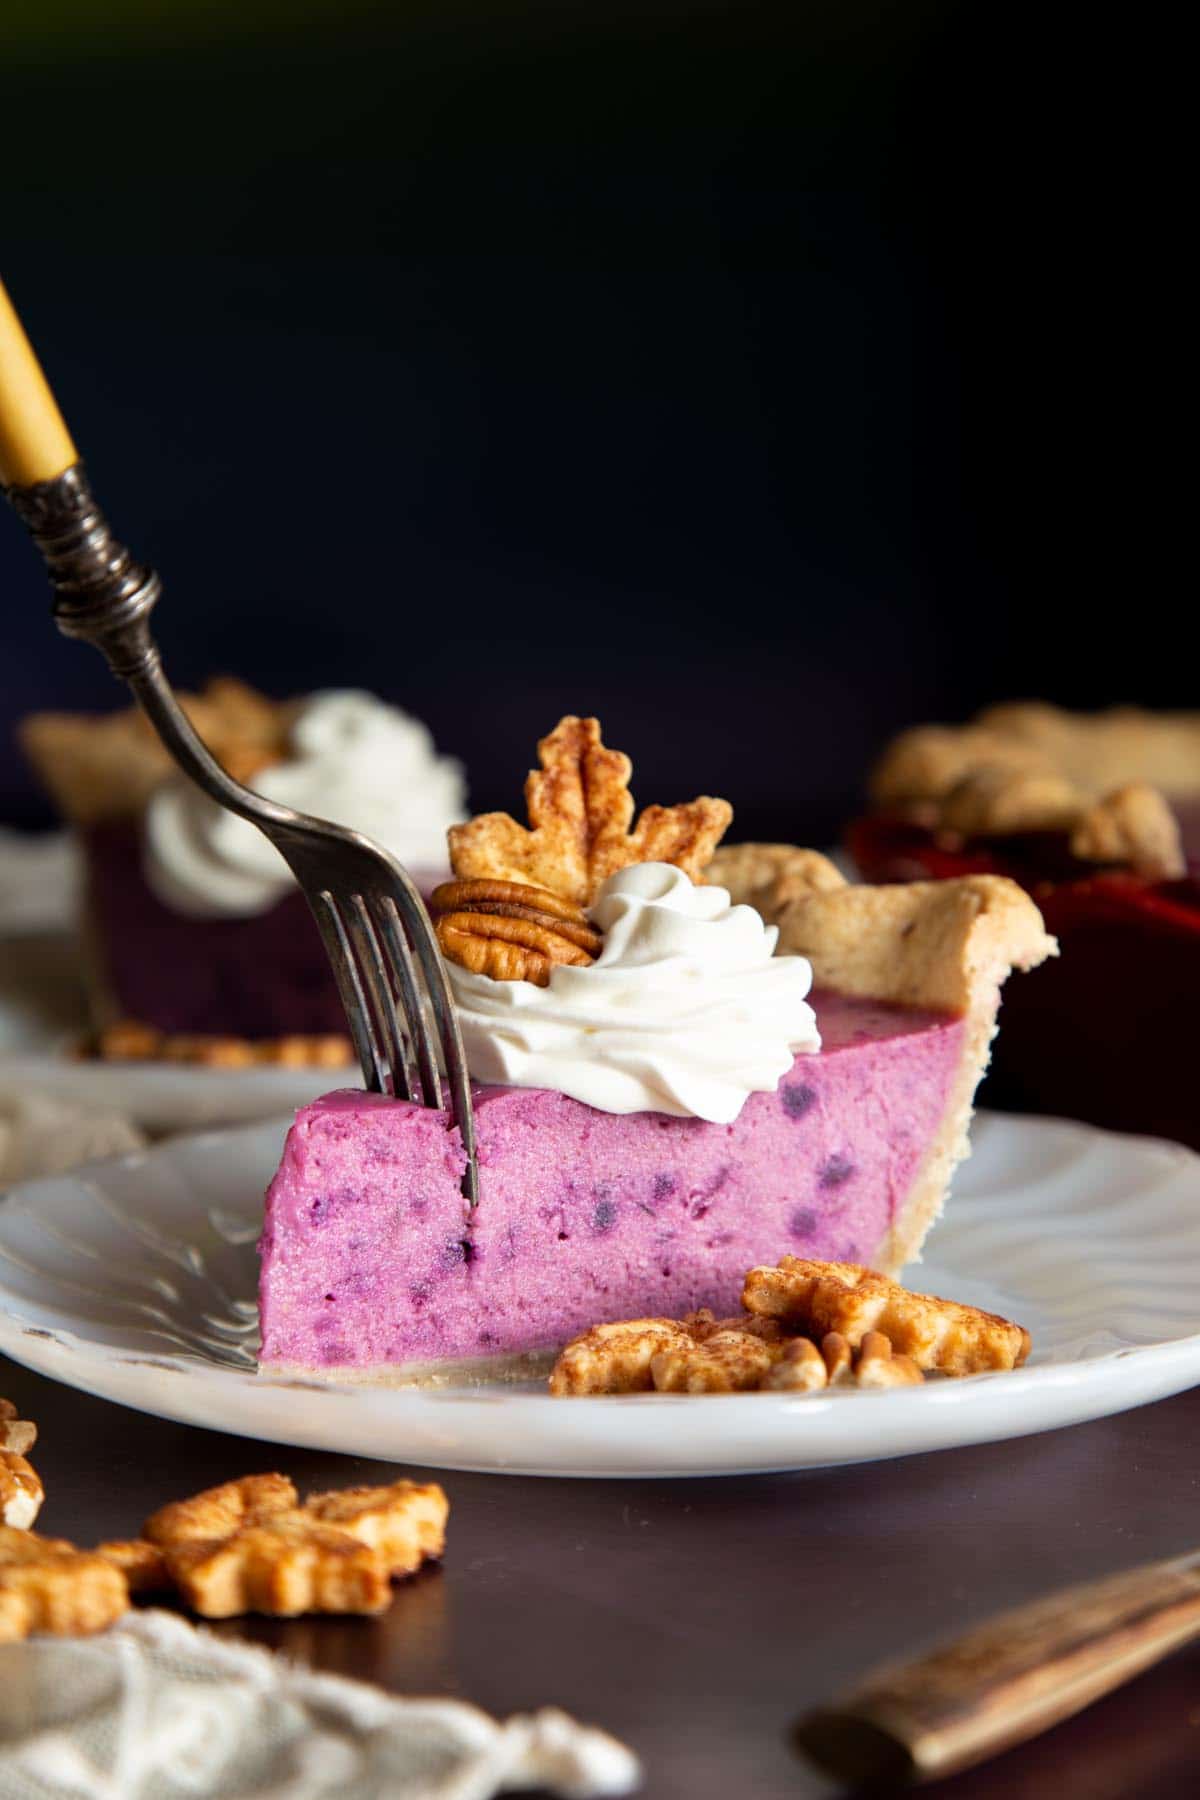 A fork is cutting into a slice of purple sweet potato pie.